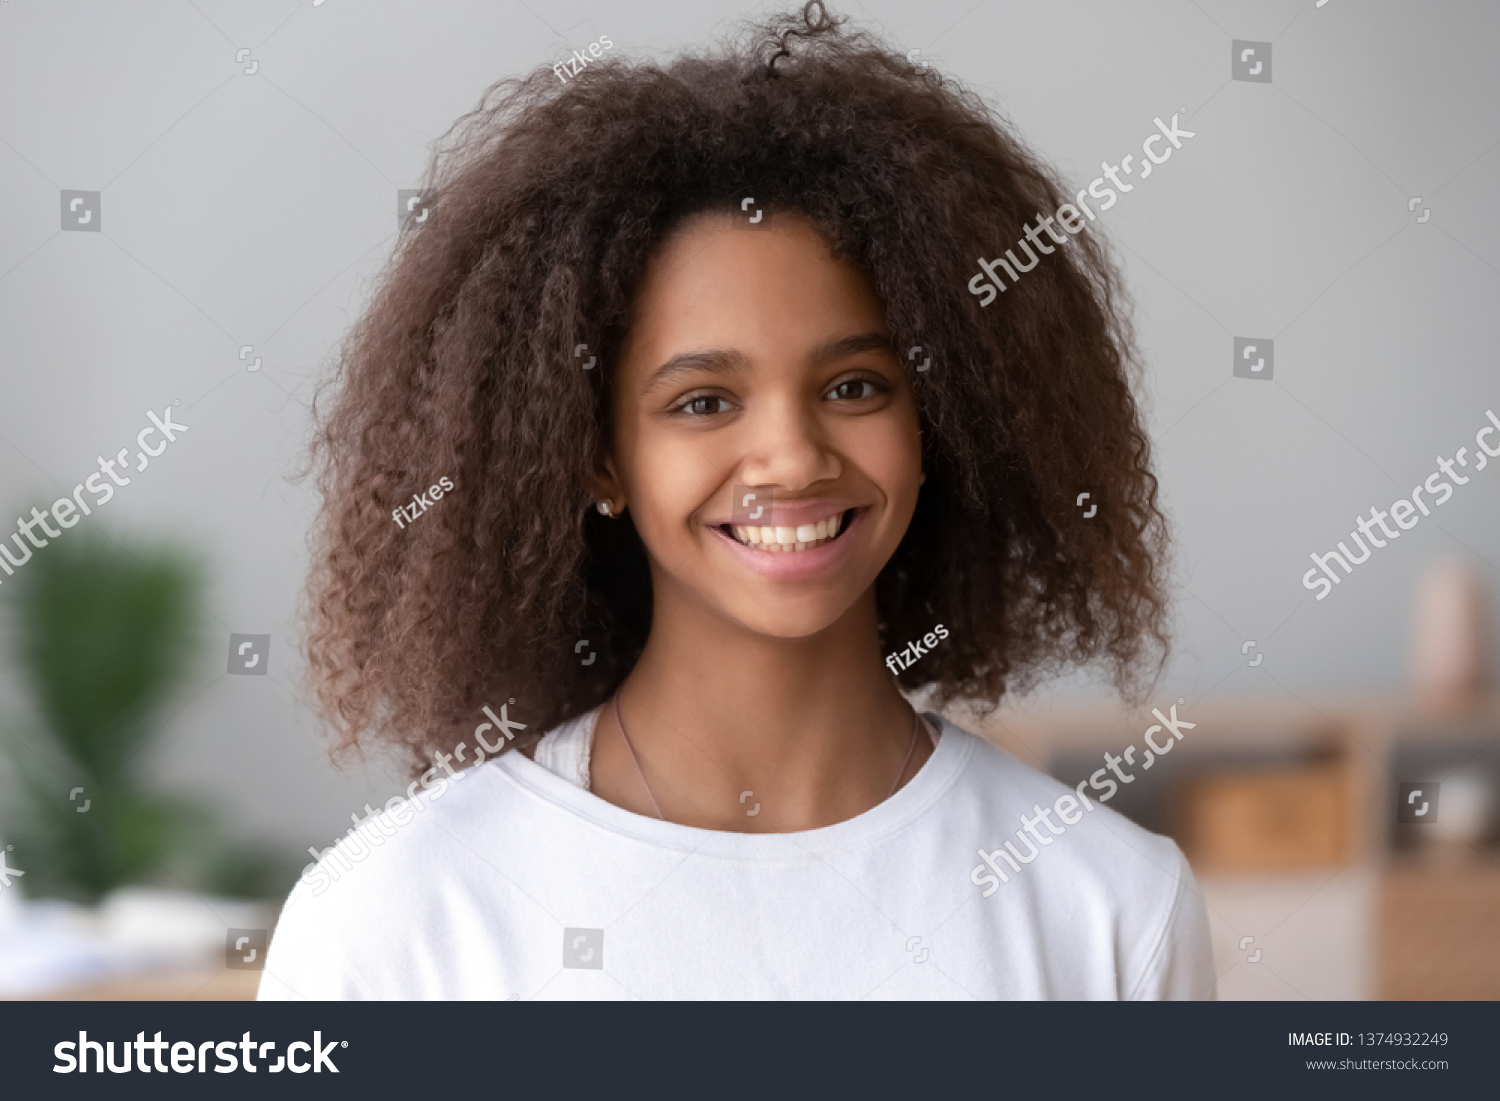 Head shot portrait of smiling African American teenage girl, feeling happy, posing for photo at home, beautiful positive mixed race teenager looking at camera, laughing, having fun #1374932249